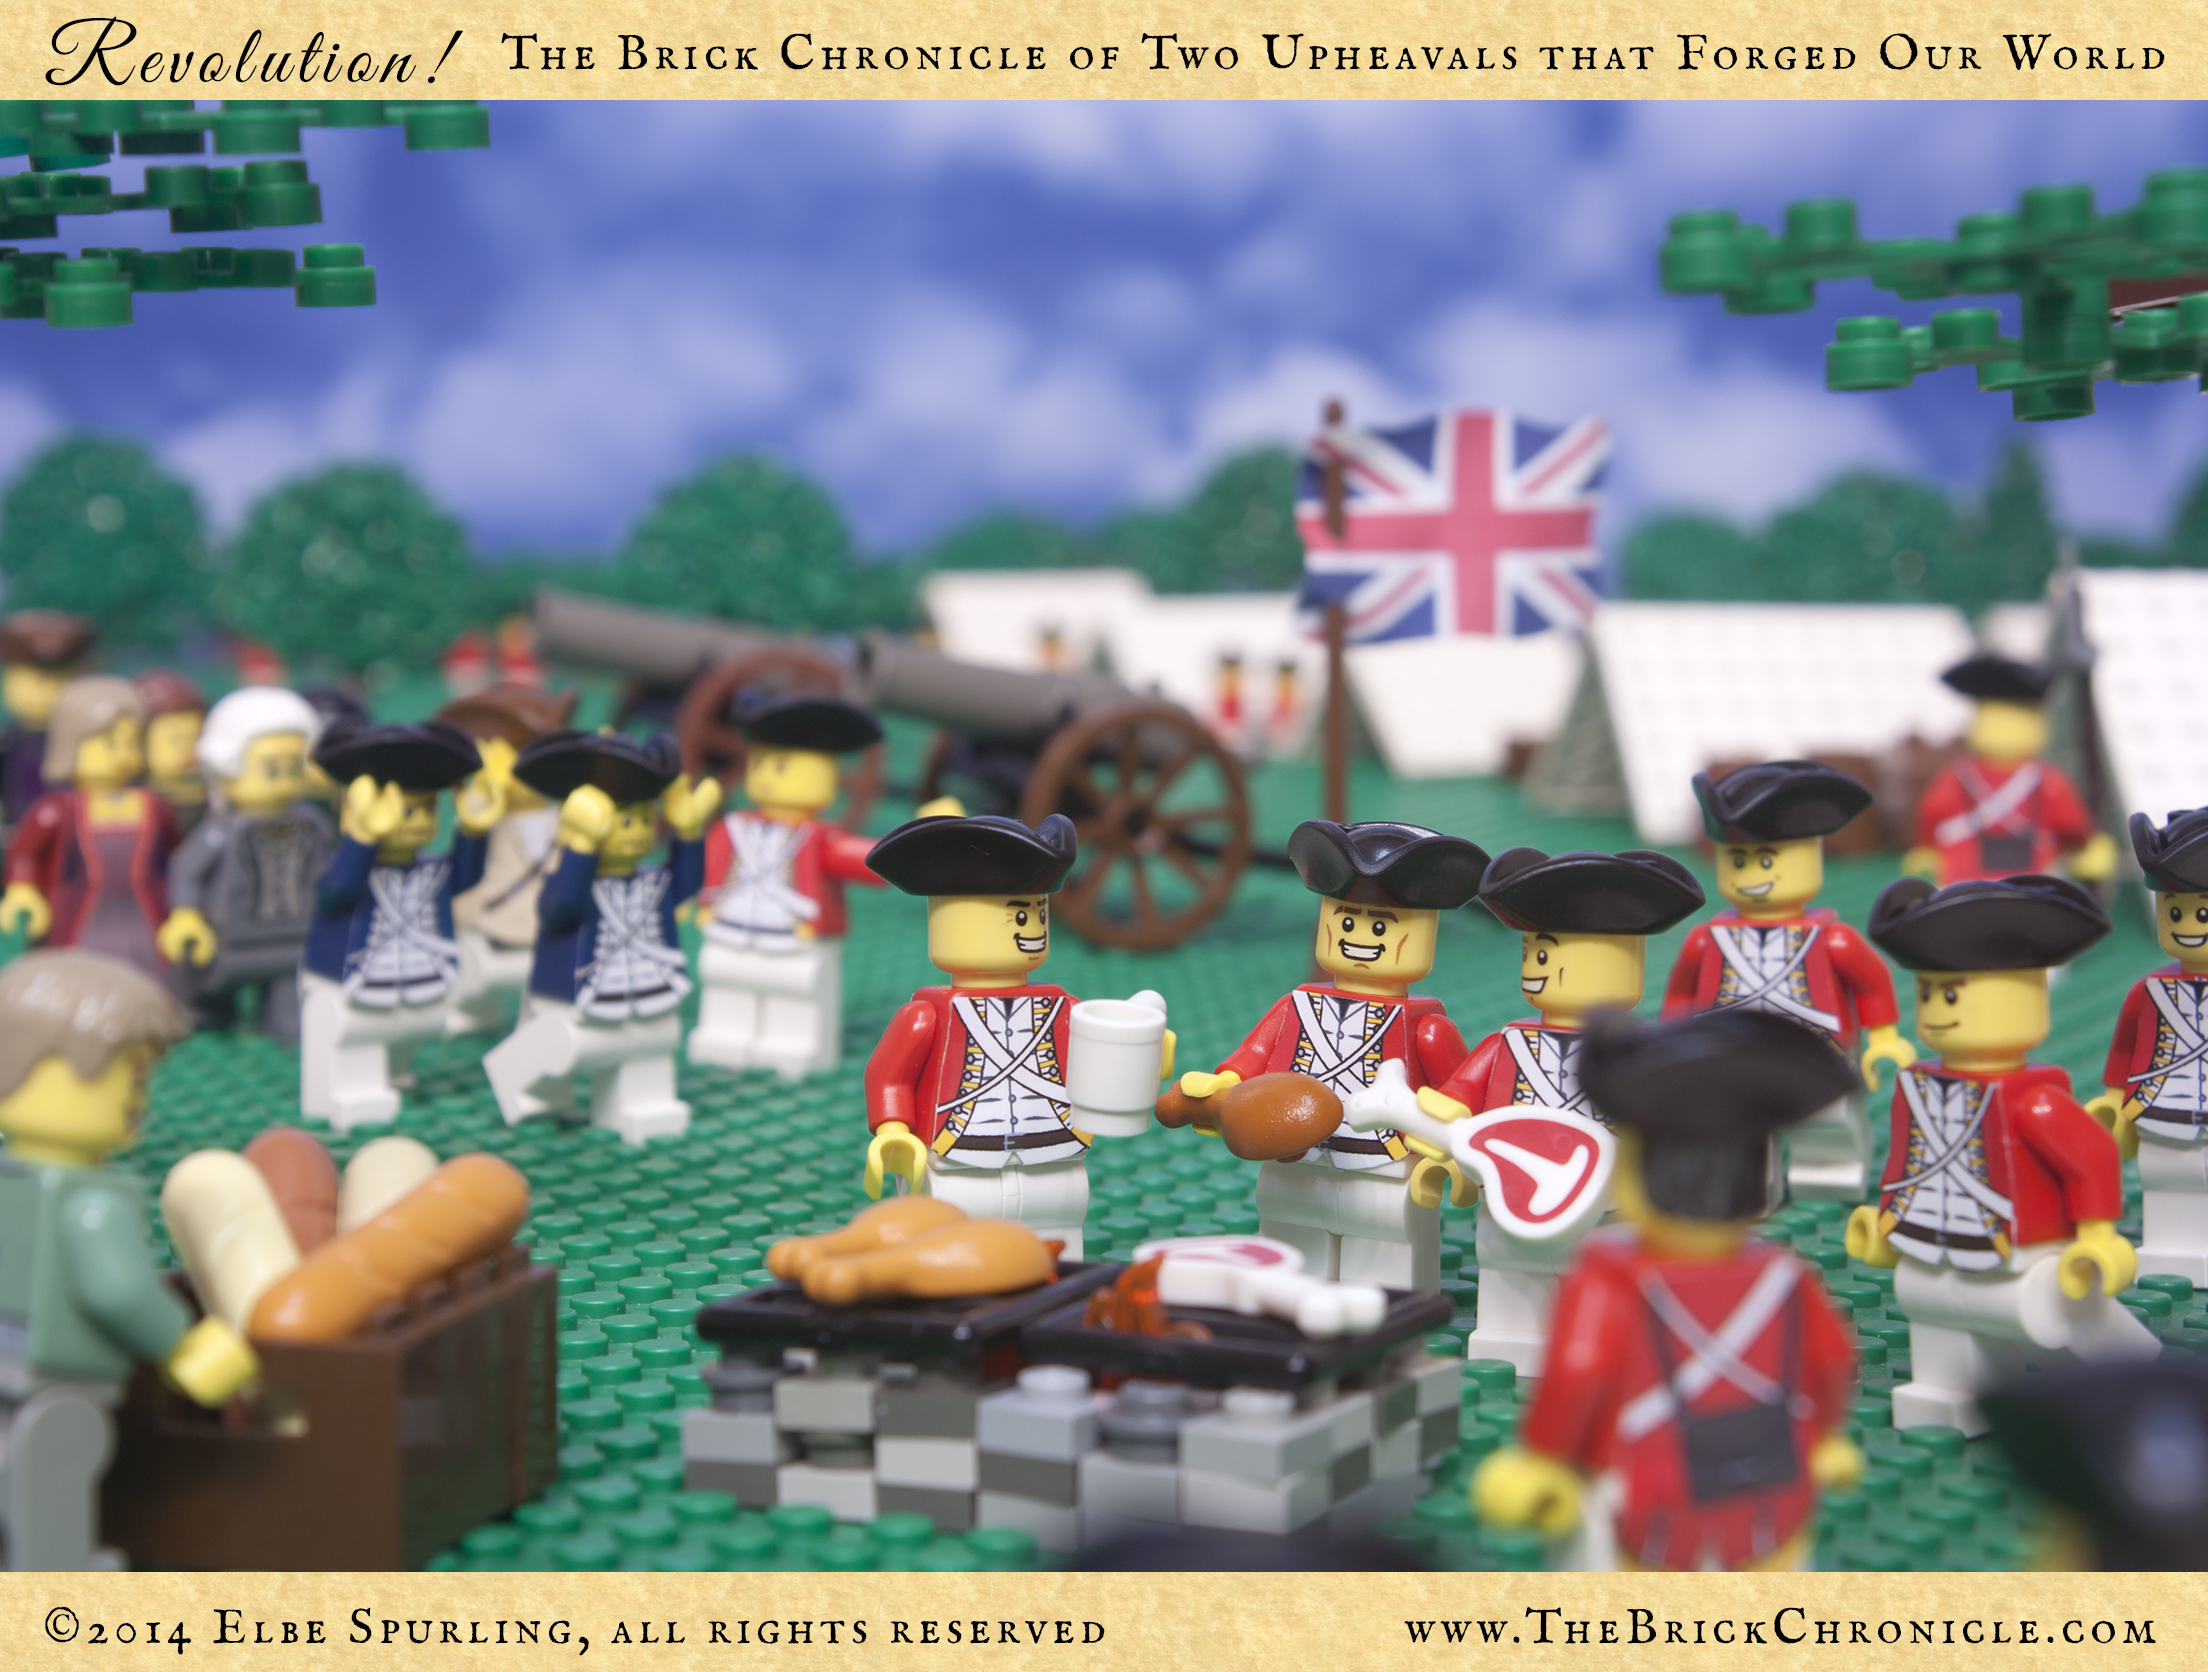 Several tense weeks passed. With total command of the sea and rivers, General Howe could land his troops wherever and whenever he pleased, and seemed in no particular hurry. In contrast to the filthy and disease-ridden camps of the rebel troops, the fastidious Redcoats were enjoying good health and plentiful supplies brought by sympathetic locals. With each passing day, they were joined by more and more deserters from the Continental Army and oppressed loyalists from the city.